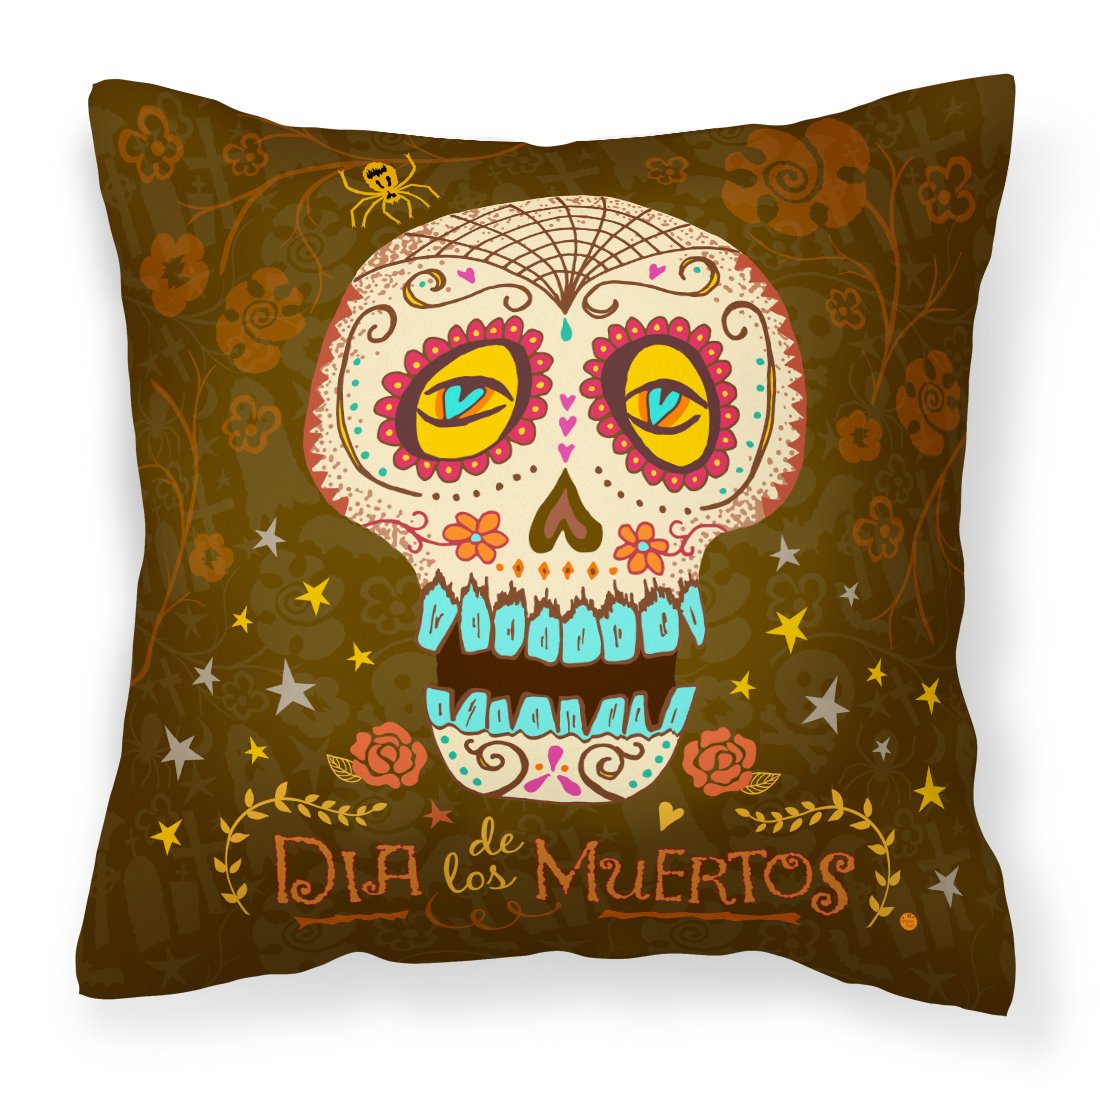 Day of the Dead Fabric Decorative Pillow VHA3031PW1818 by Caroline's Treasures